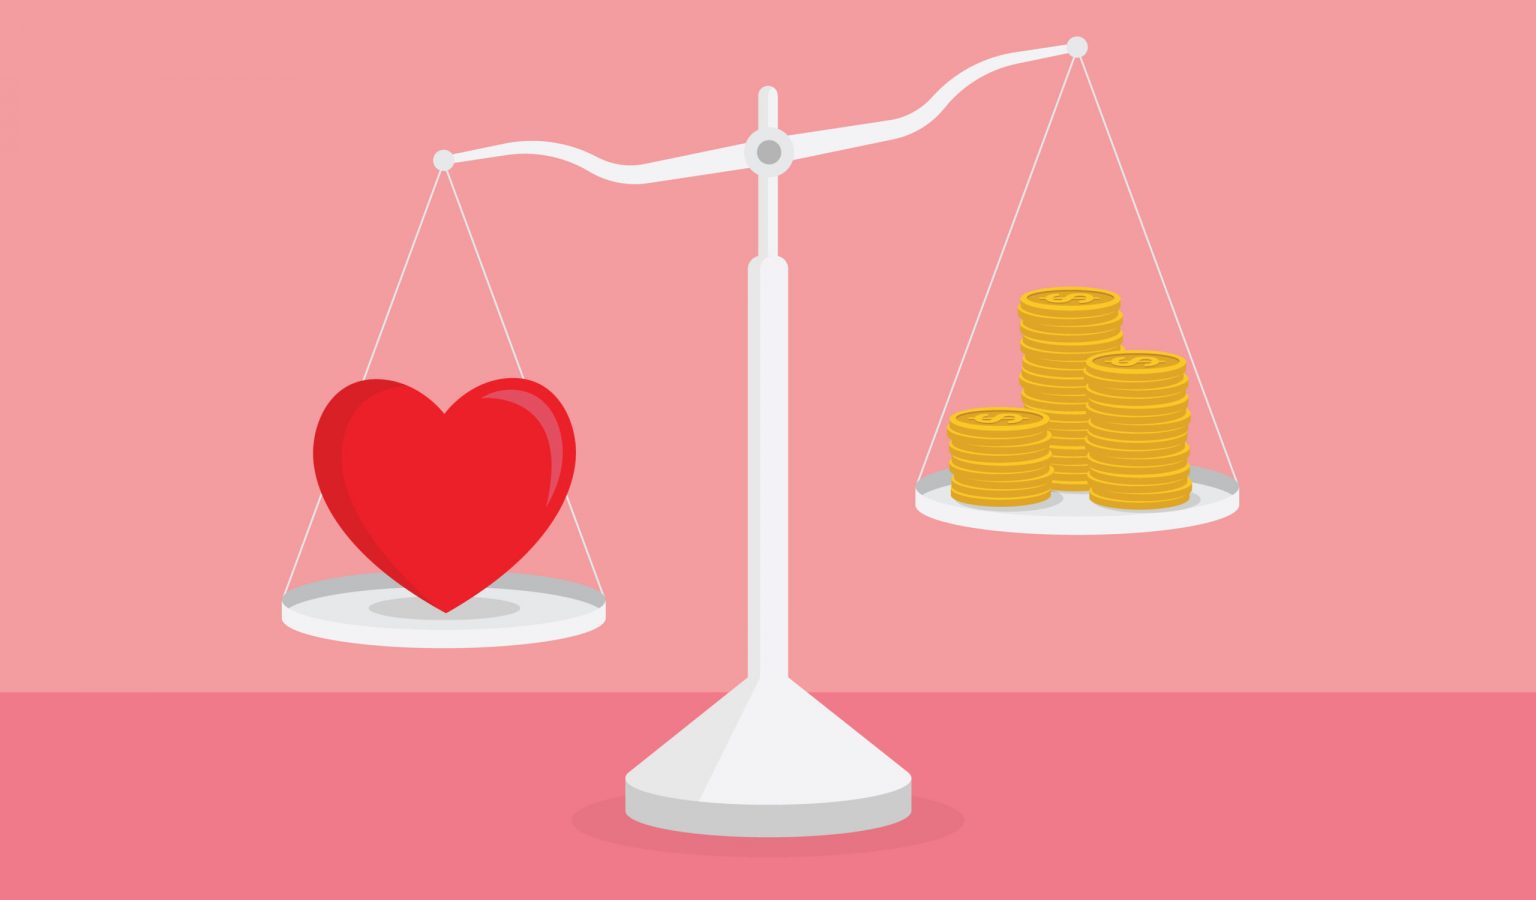 Heart and money on a weight scale